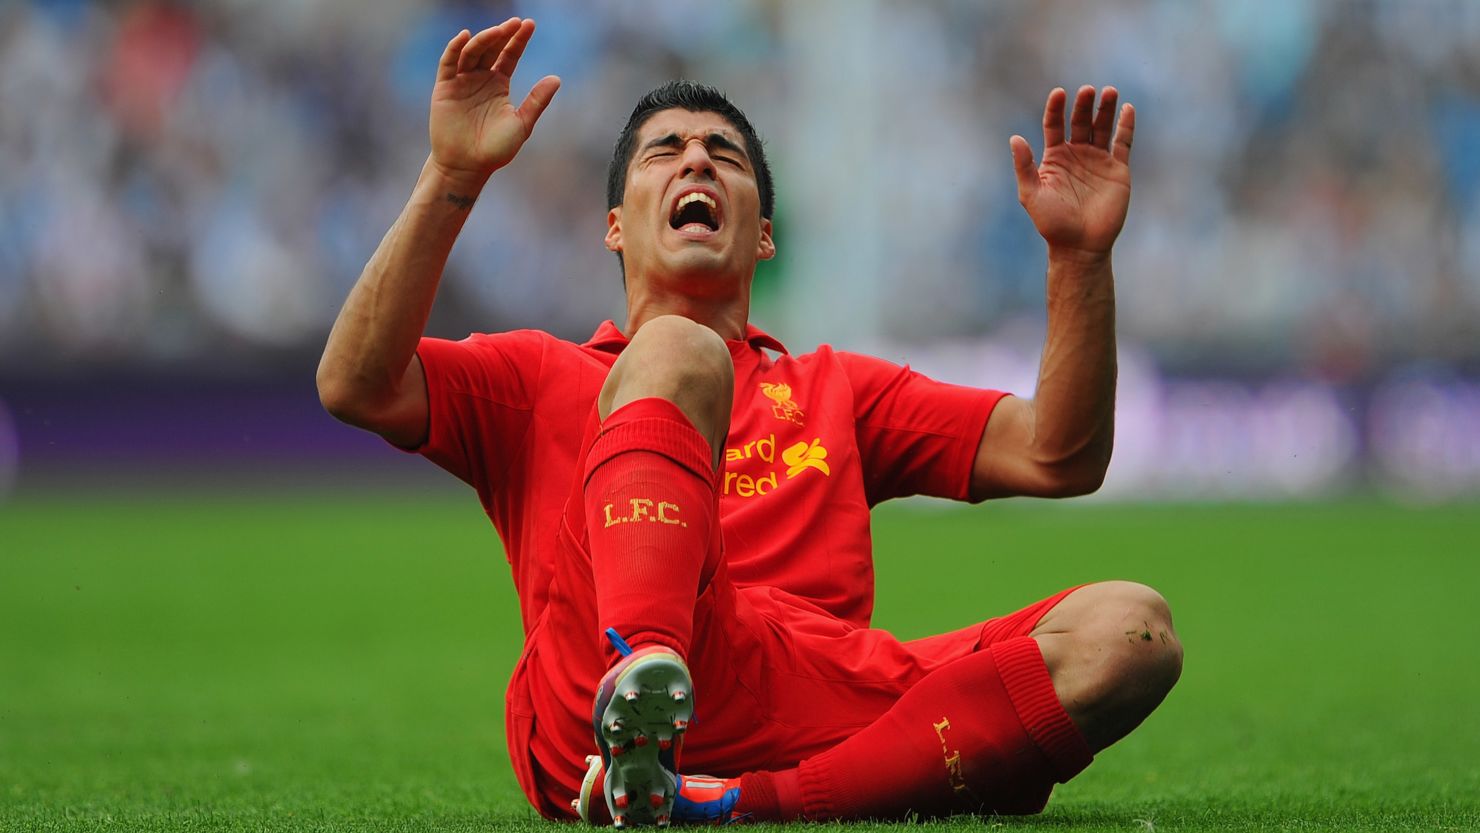 Luis Suarez reacts to a tackle in Liverpool's 3-0 defeat to West Bromwich Albion